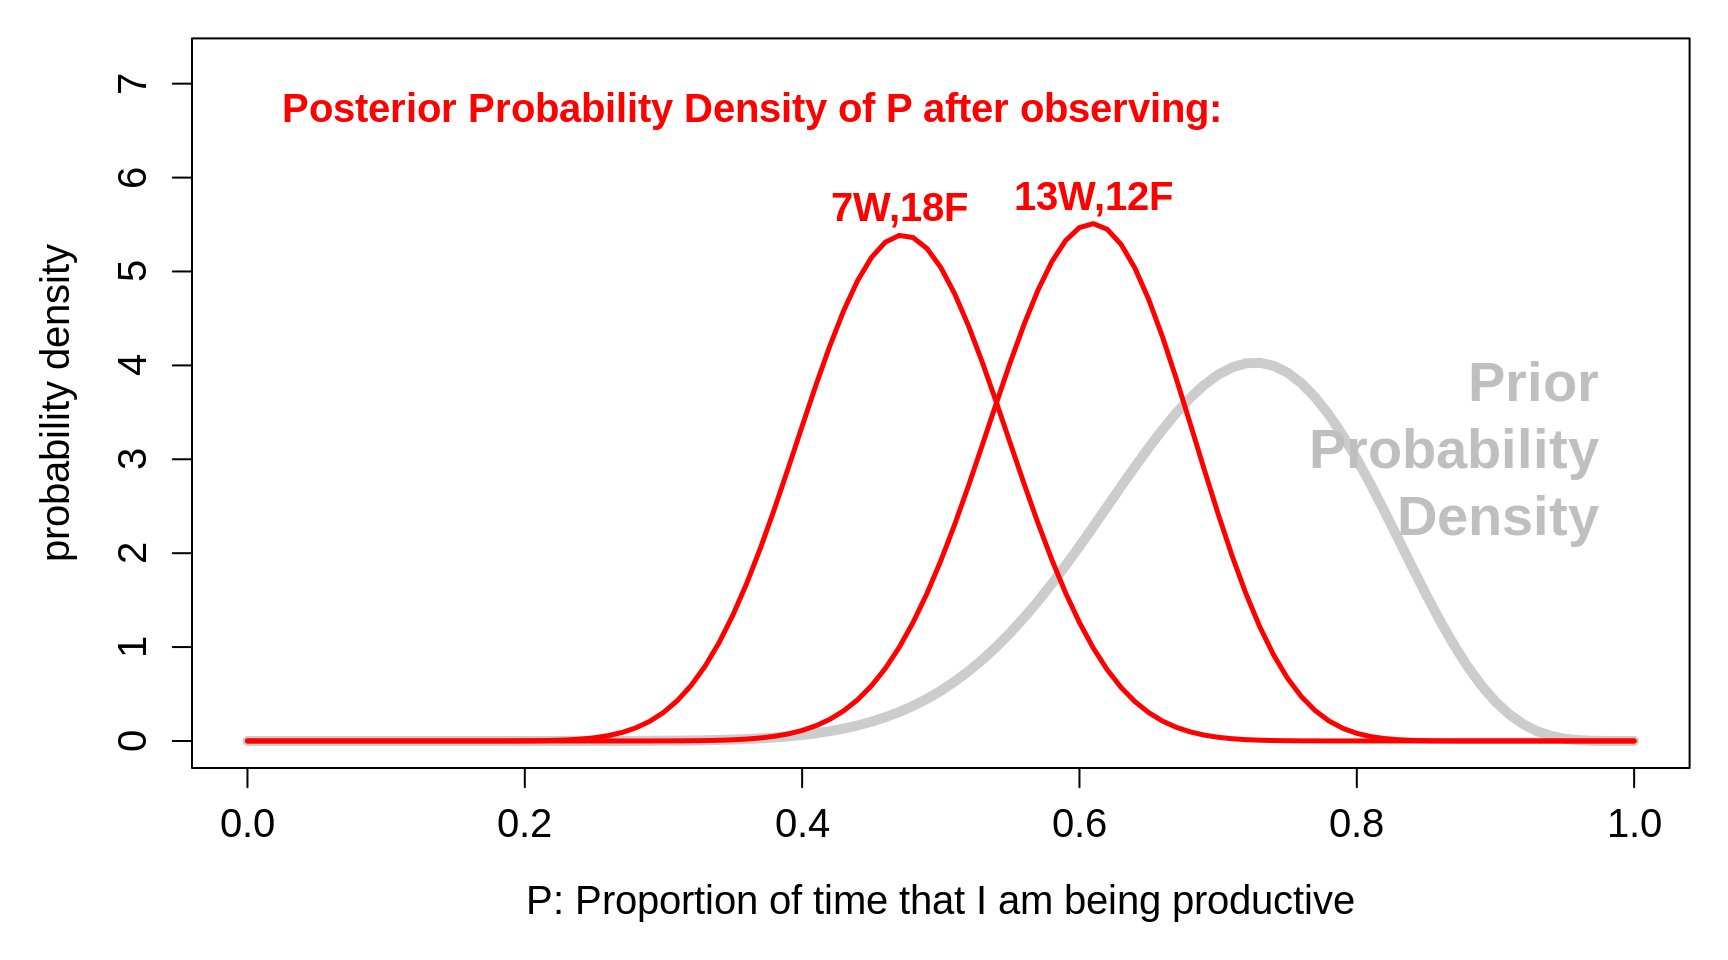 Prior probability densities for the parameter P, the proportion of time that I am being productive, together with the corresponding posterior densities, after observing that in n = 25 randomly sampled occasions, I was actually productive (W) in only 7 of the 25, or 13 of the 25.